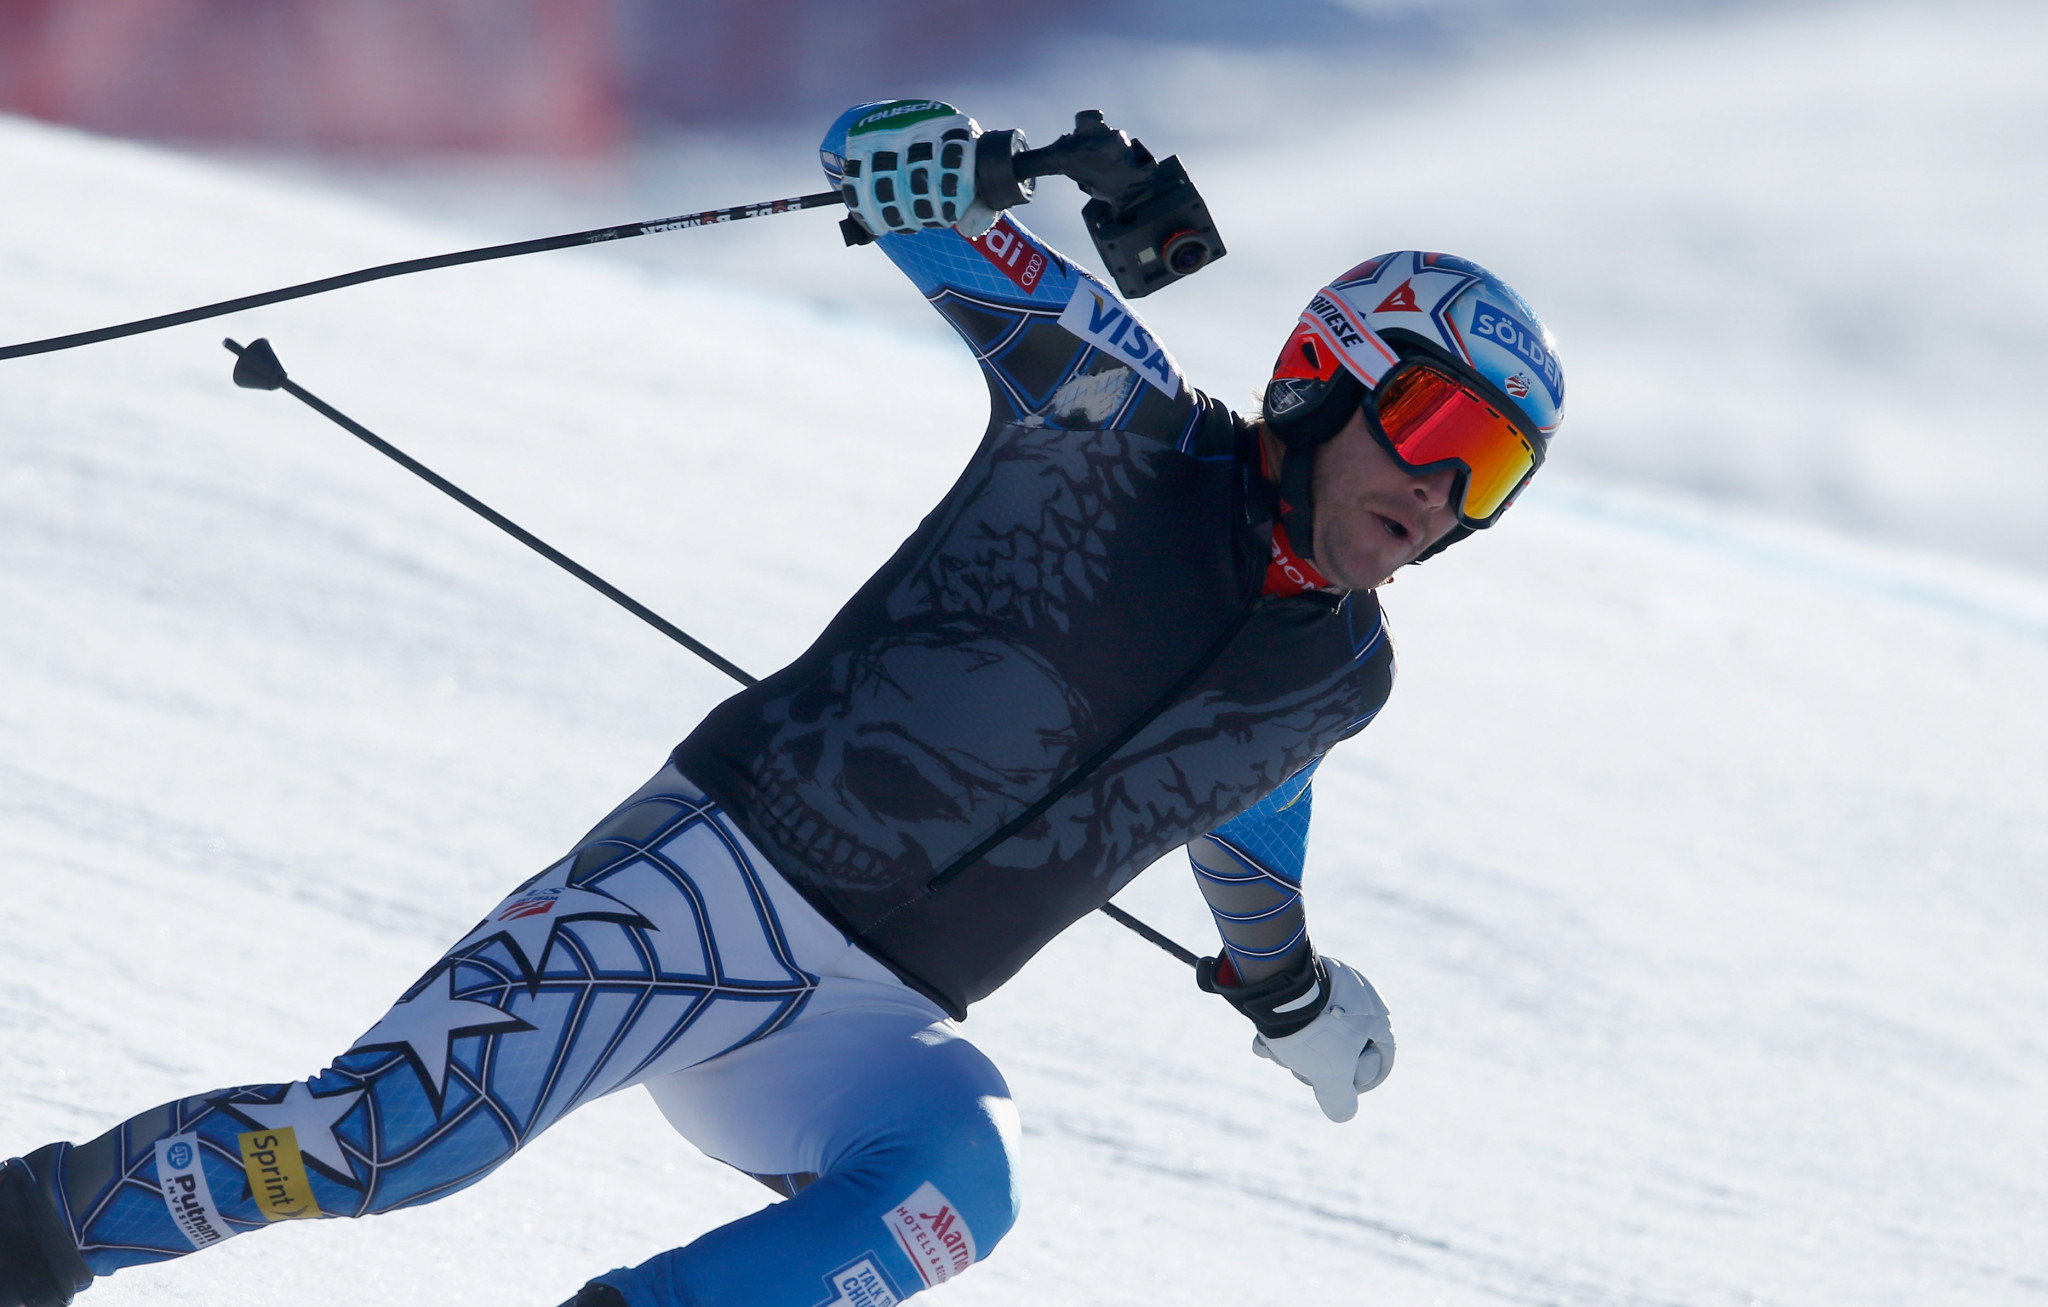 American skiing legend Bode Miller has ended speculation over his future racing career by officially confirming his retirement ©Getty Images